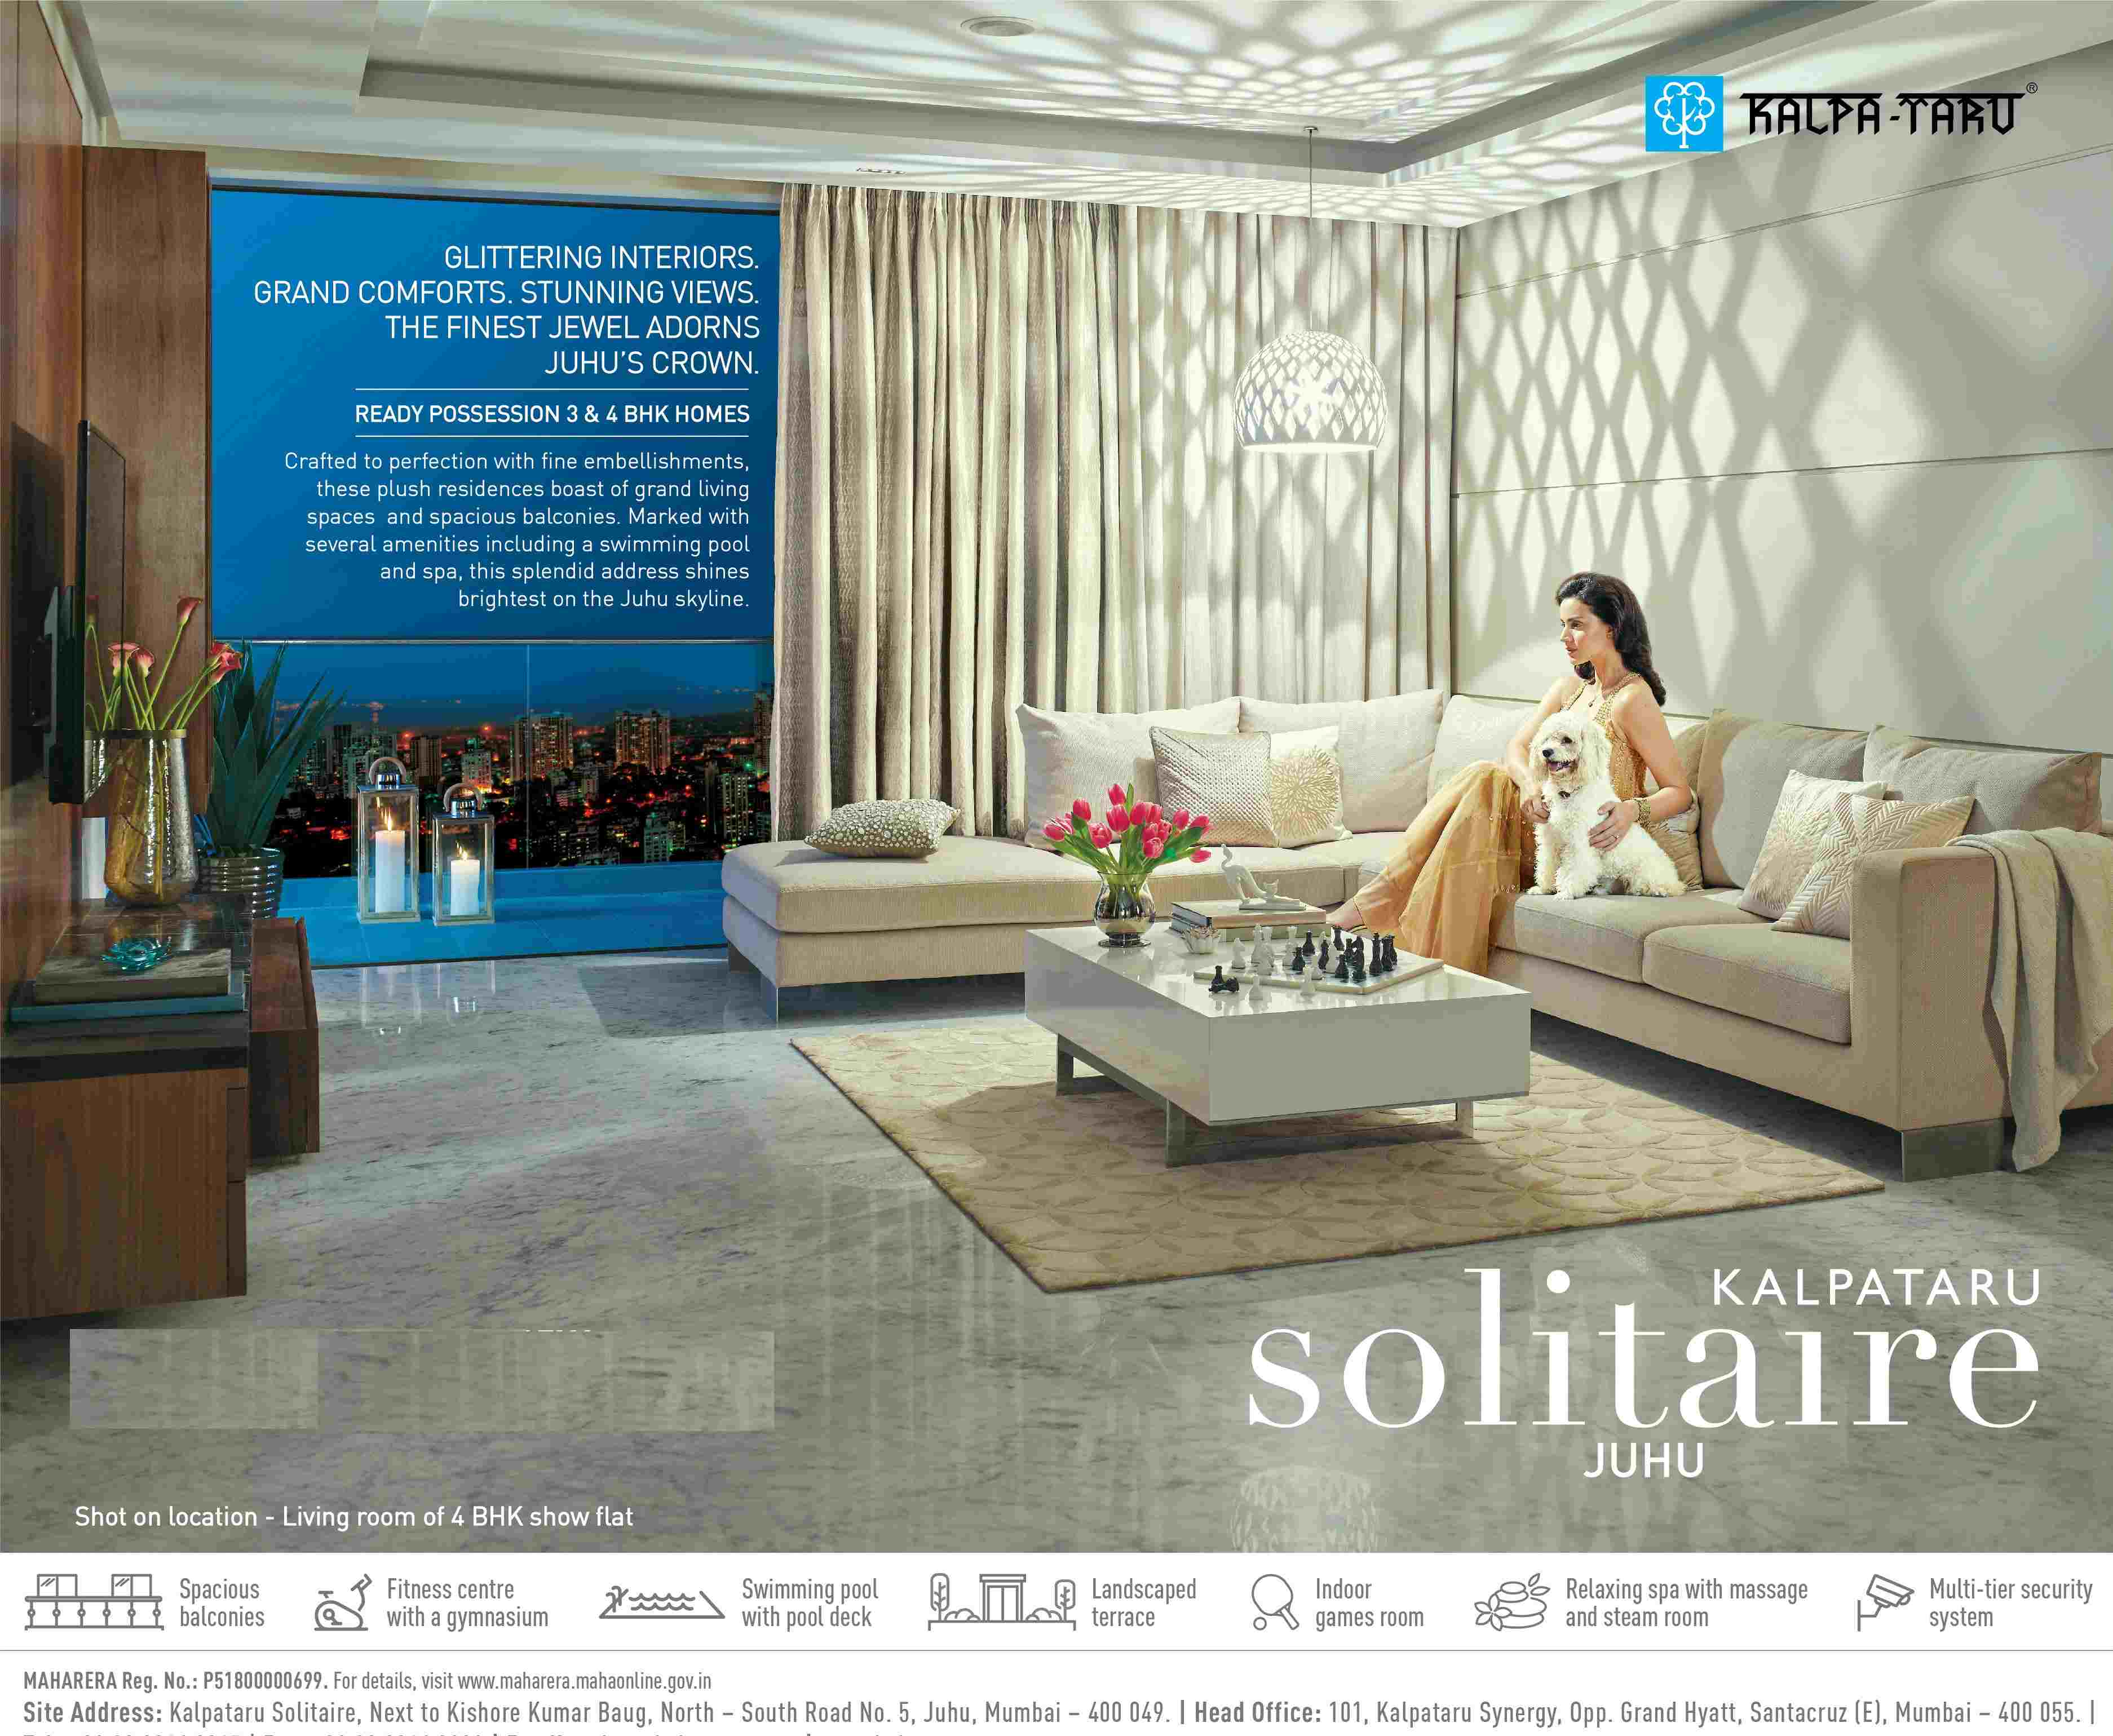 Book ready possession 3 & 4 BHK homes at Kalpataru Solitaire in Mumbai